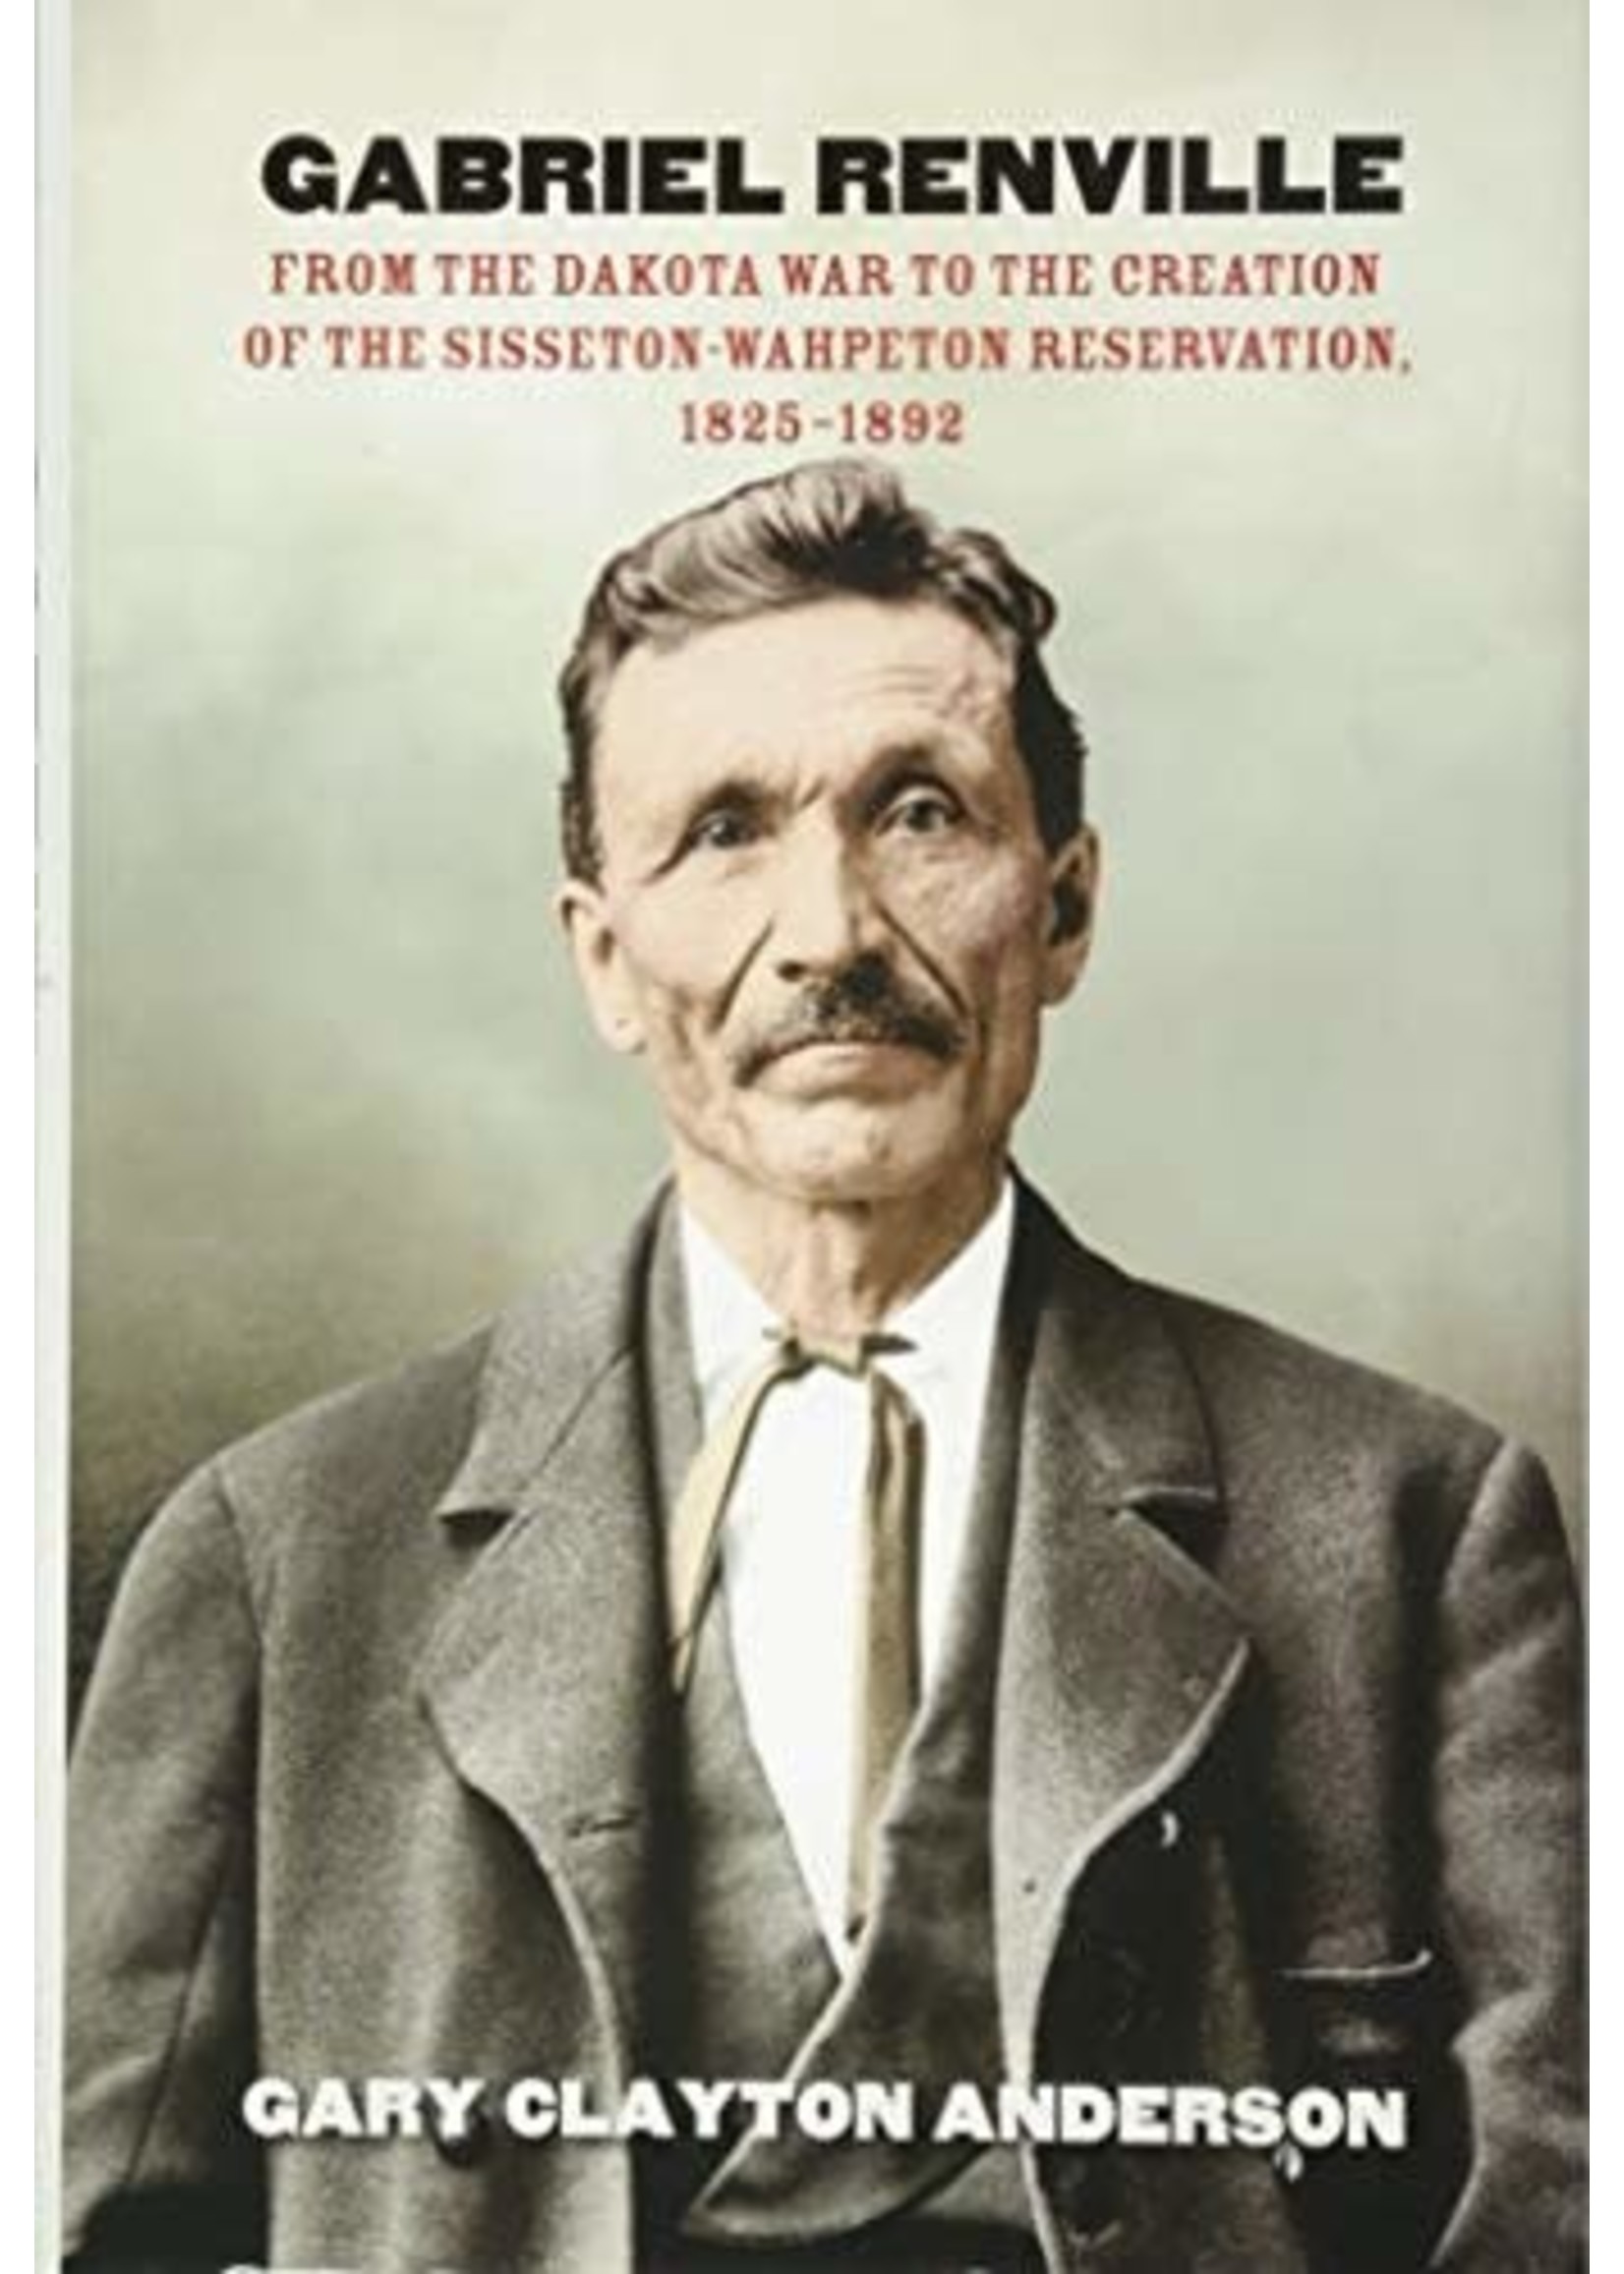 Gabriel Renville: From the Dakota War to the Creation of the Sisserton-Wahpeton Reservation, 1825-1892